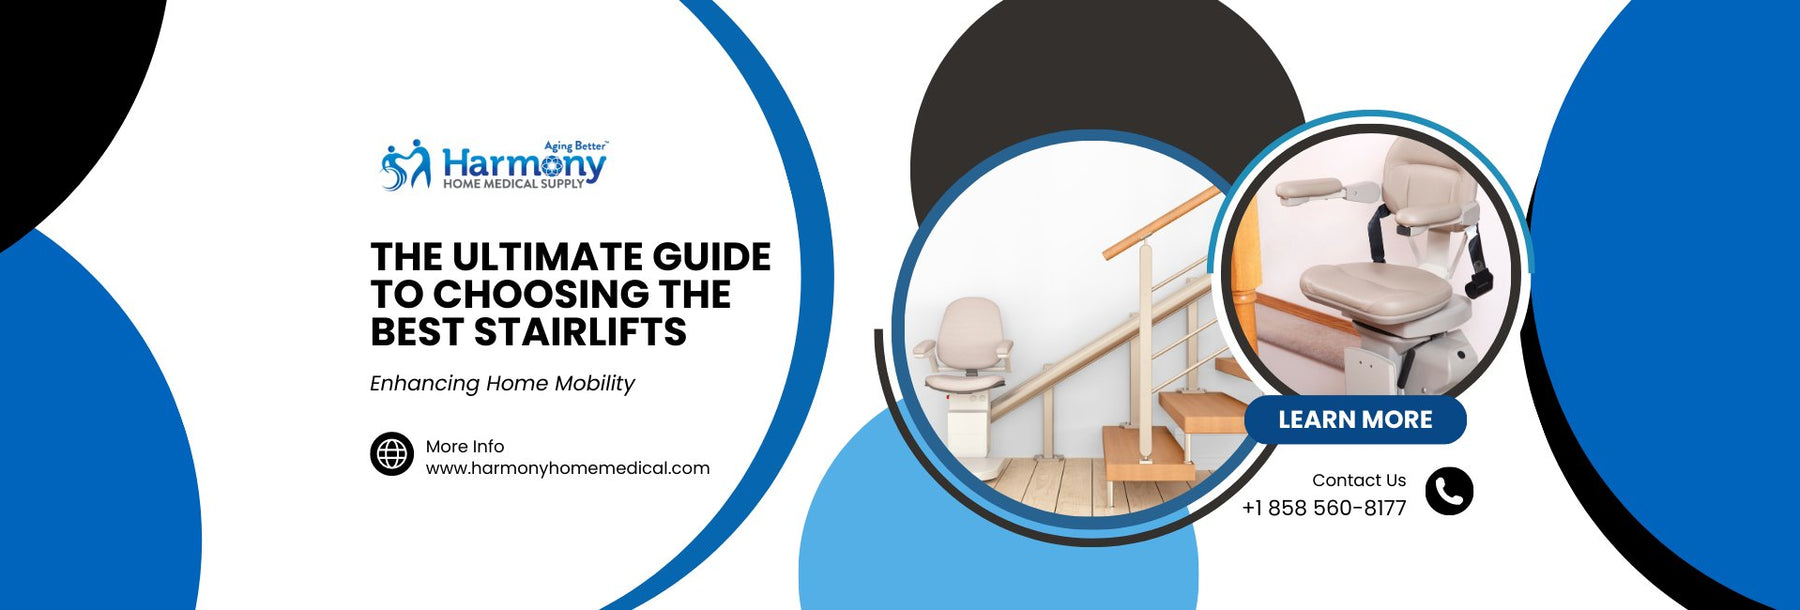 The Ultimate Guide to Choosing the Best Stairlifts - Harmony Home Medical Supply